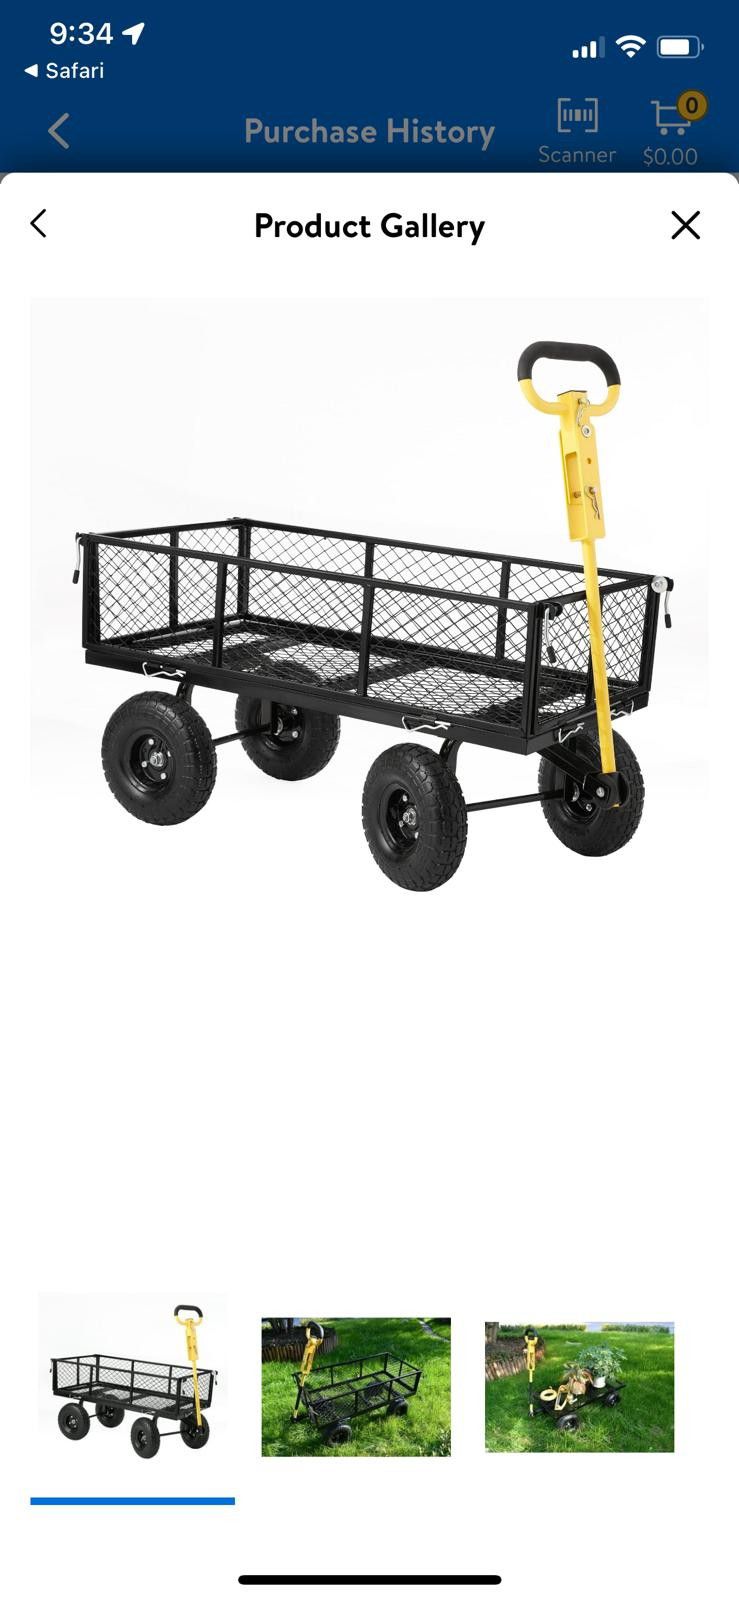 Expert Gardener Landscaping Plant and Tool Cart 39in